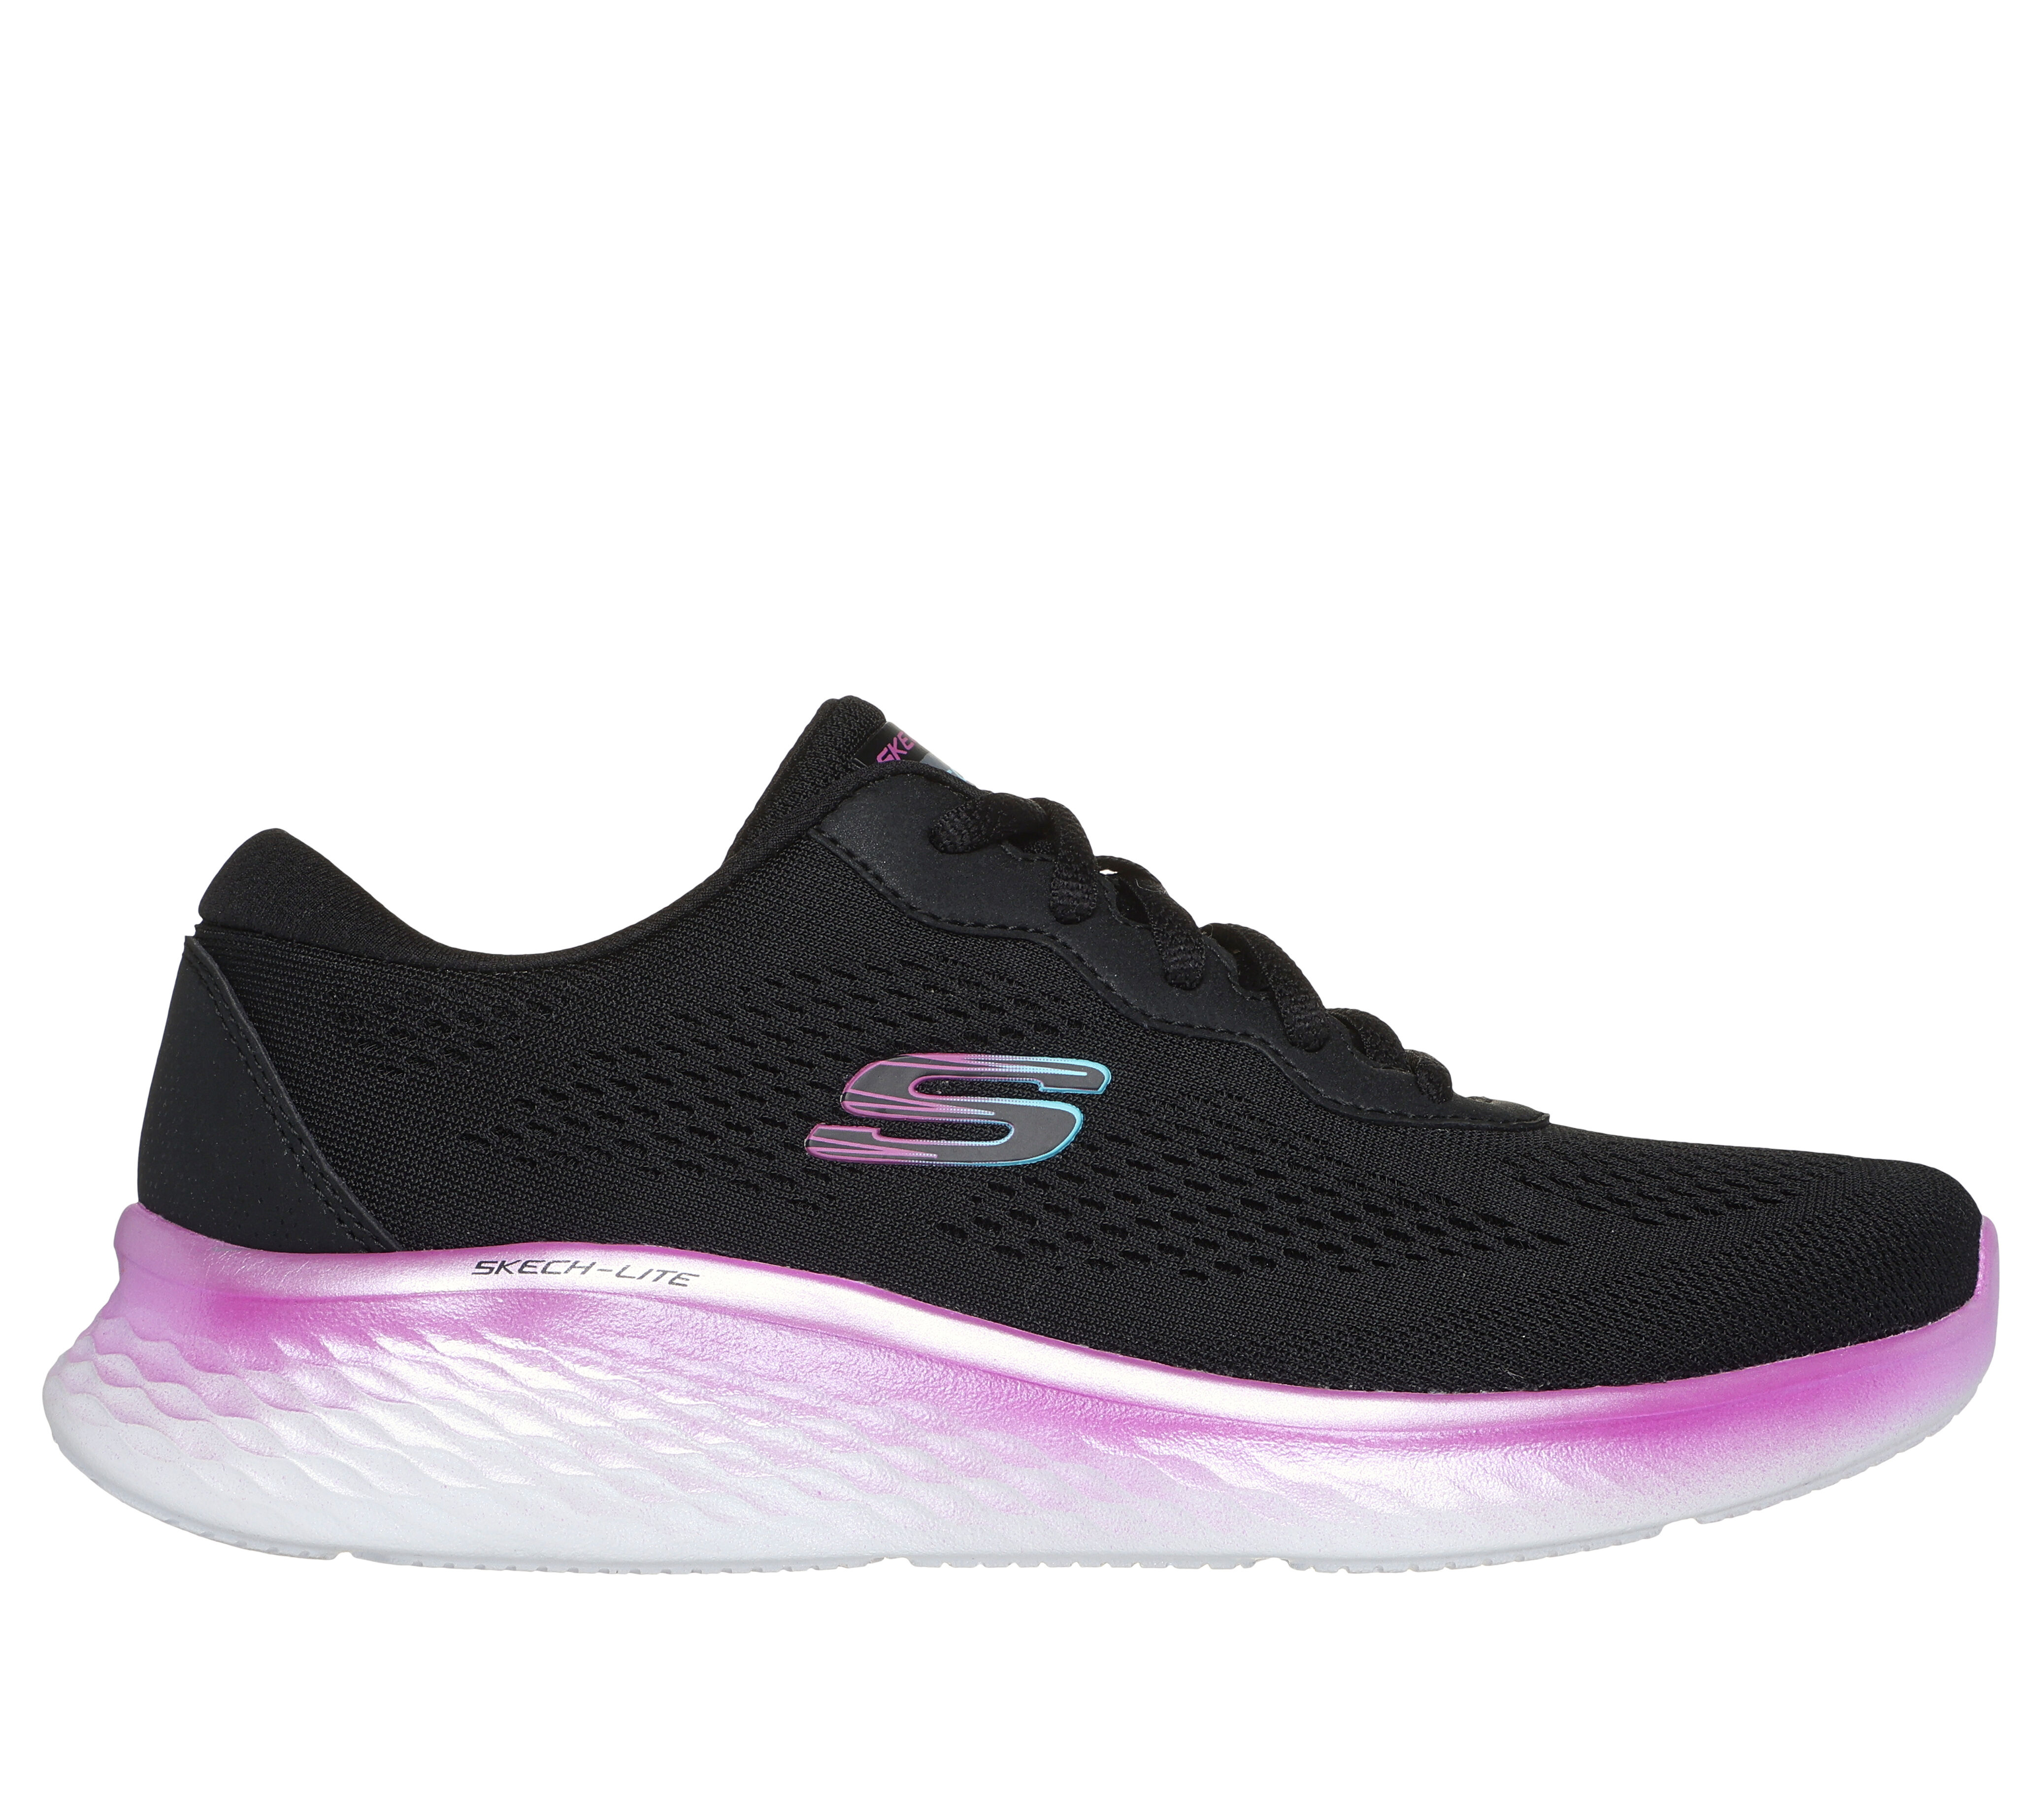 Recommend popular sale items | SKECHERS